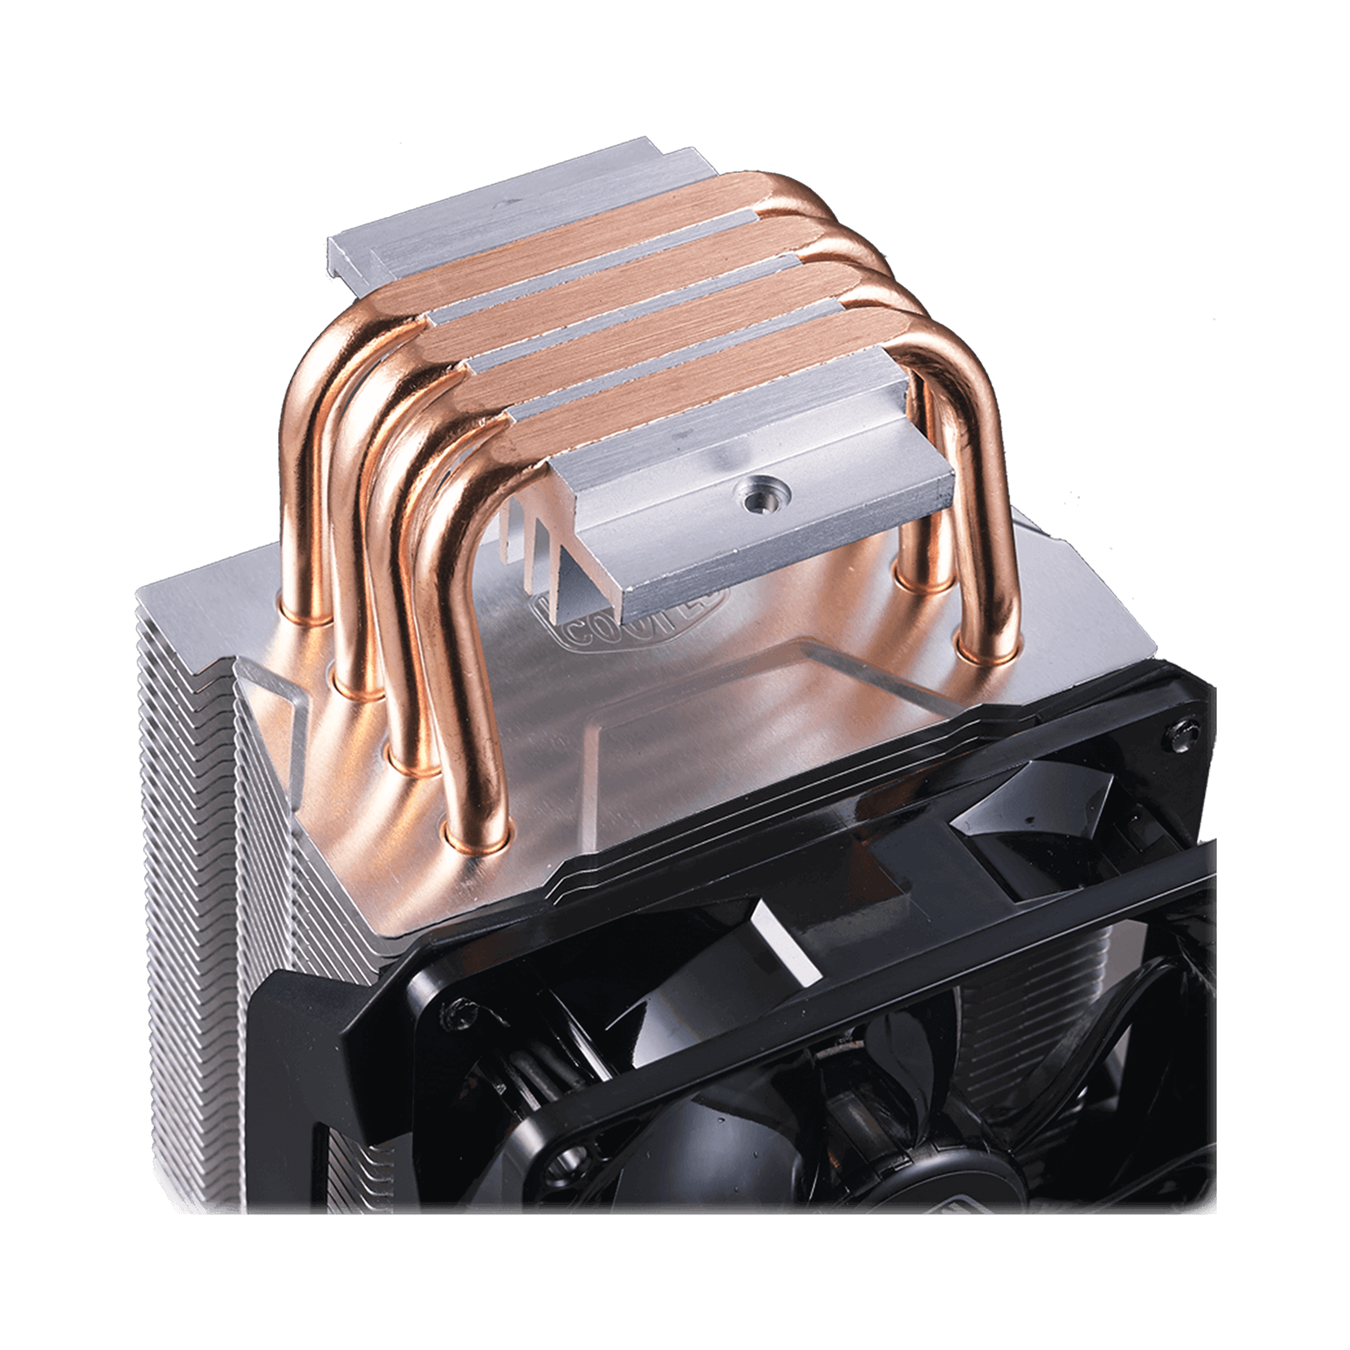 4 heat pipes with Direct Contact Technology effectively provide excellent heat dissipation